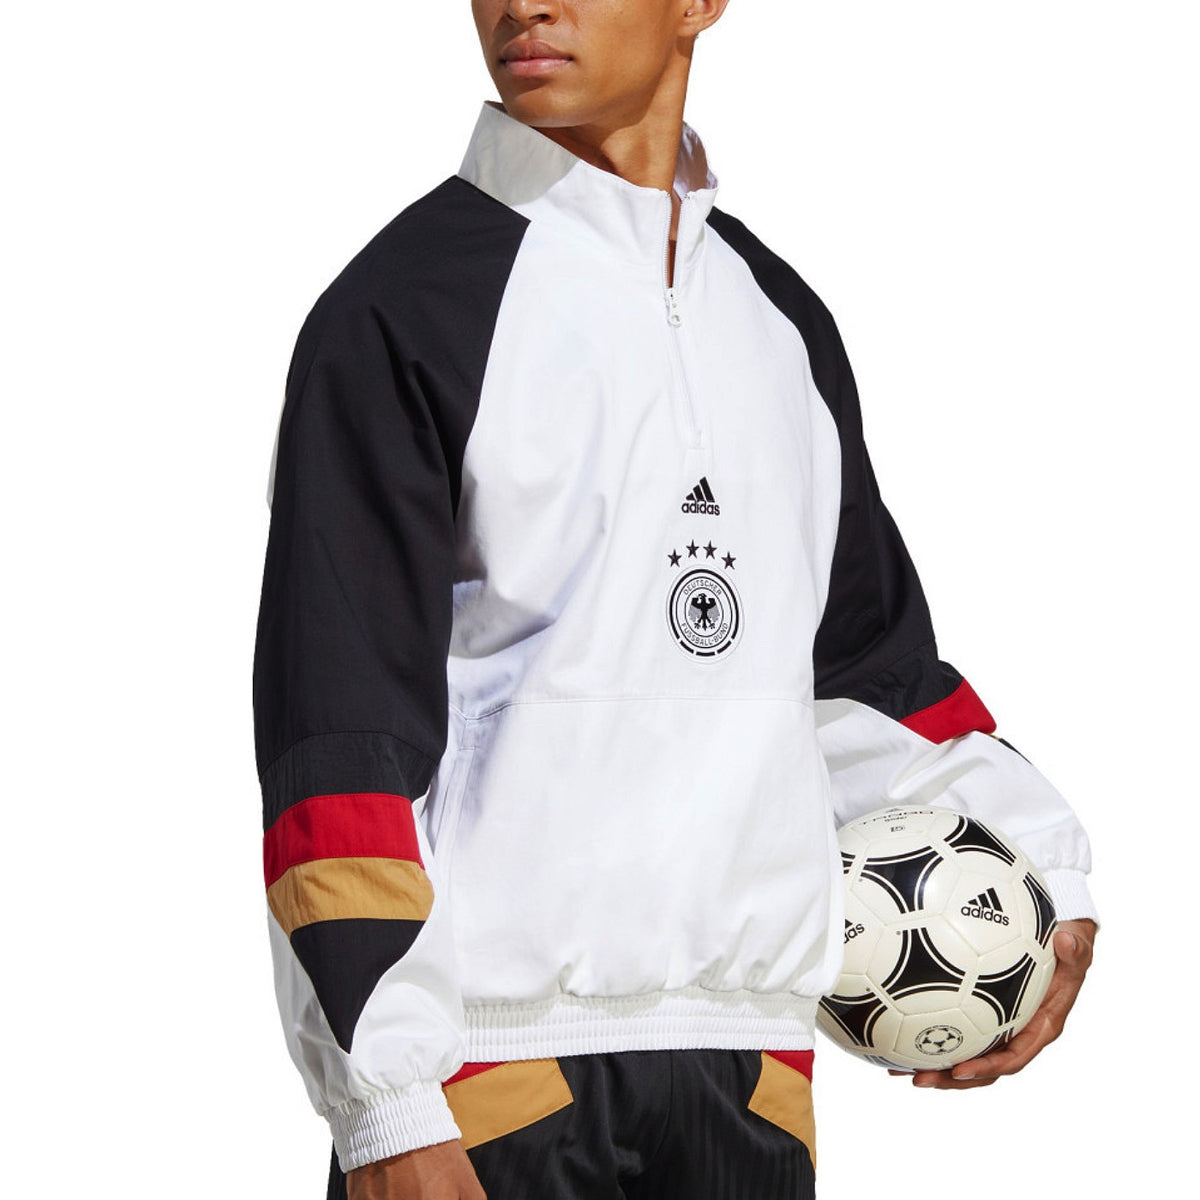 2022/23 Adidas presentation Germany – Soccer tracksuit fans Icon -